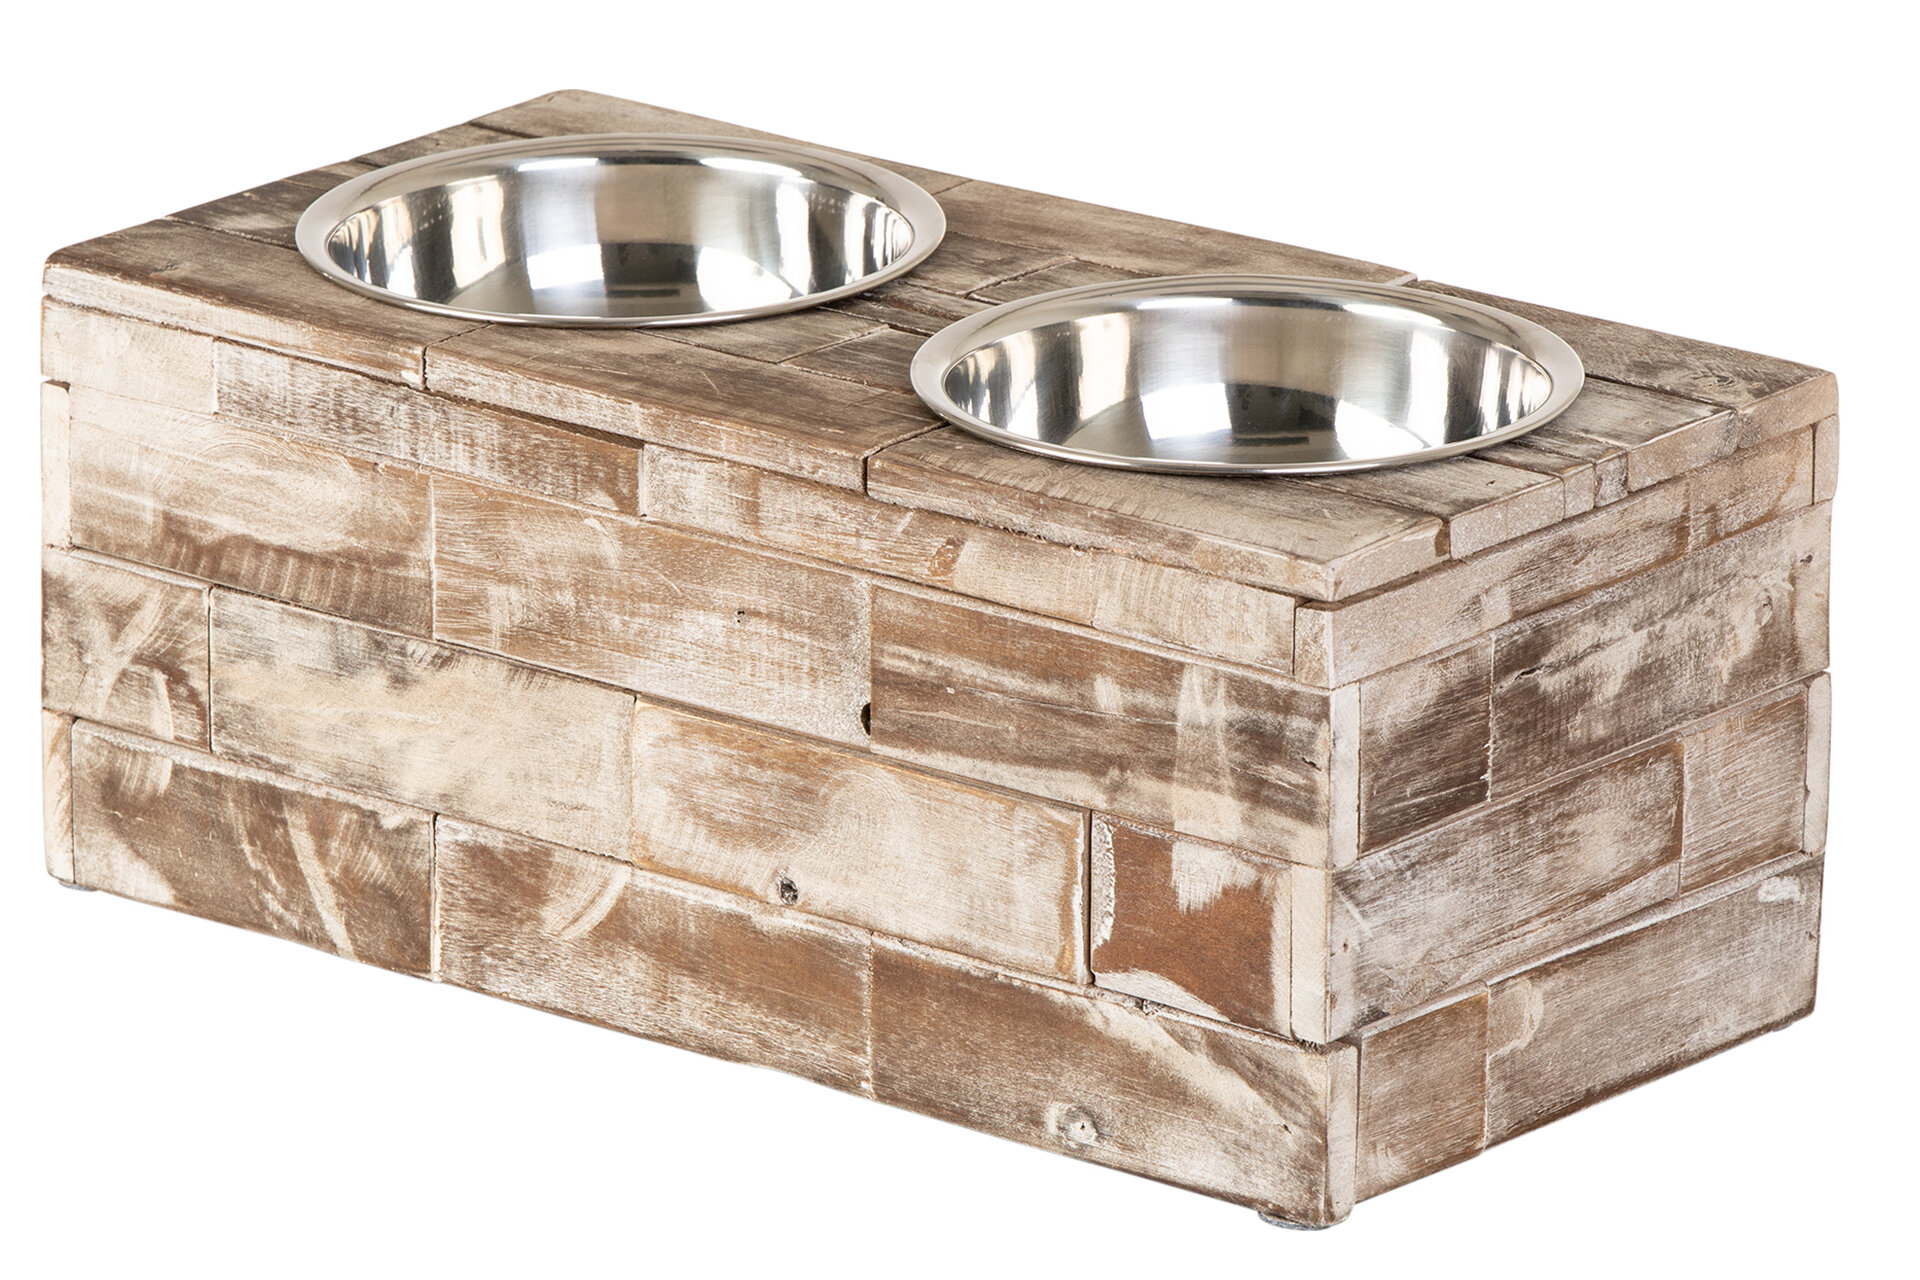 Huntley Pet Elevated Dog & Cat Double Bowl Feeder Stainless Steel